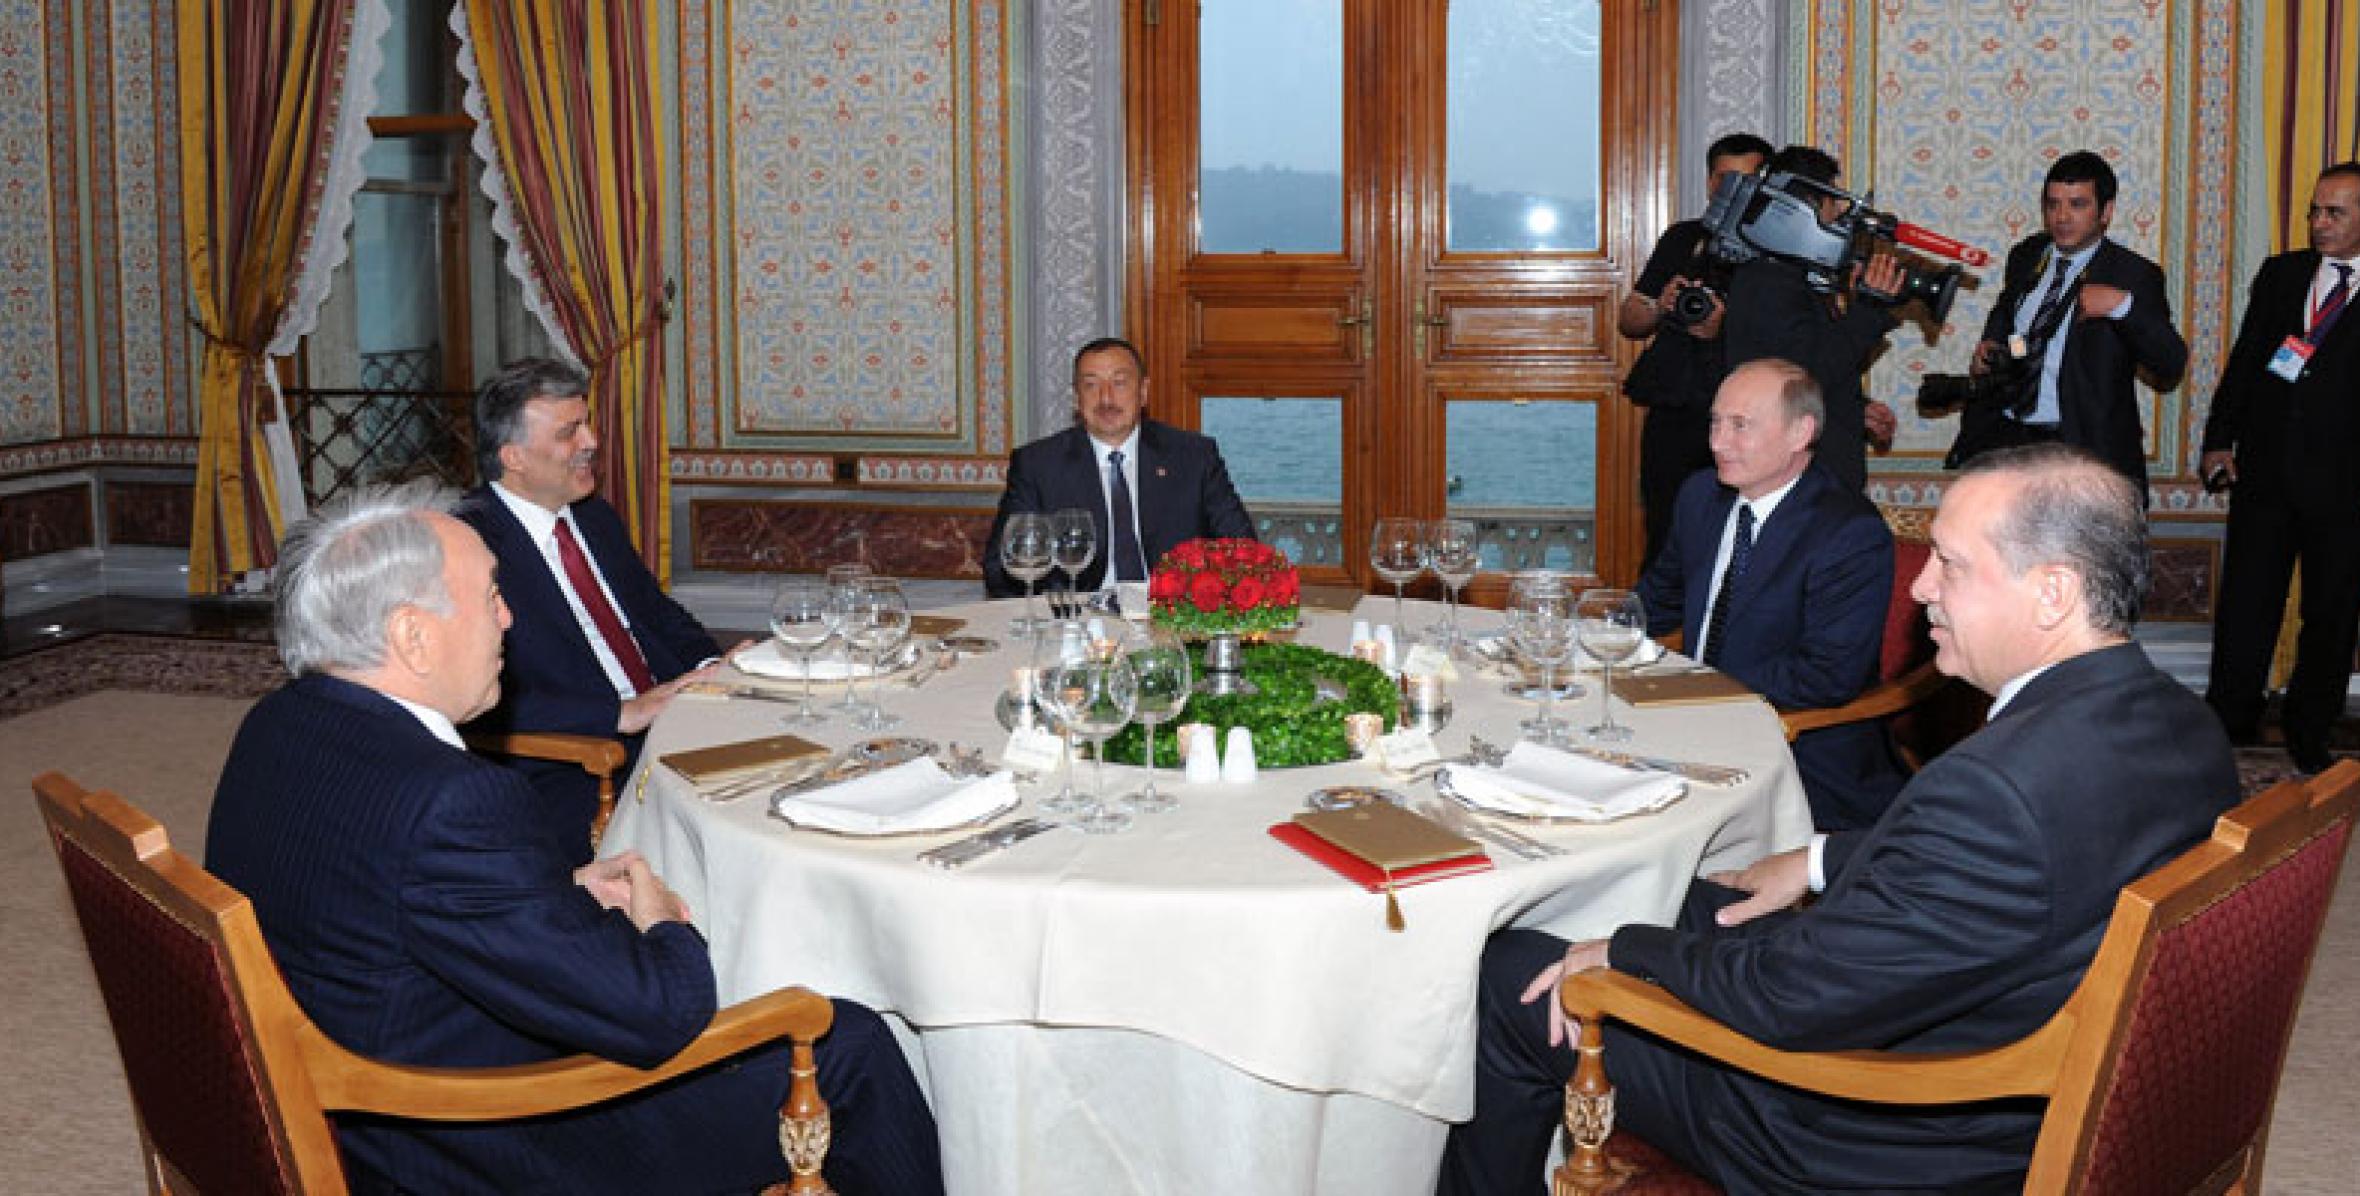 Ilham Aliyev attended the dinner reception for the state and government officials in Istanbul